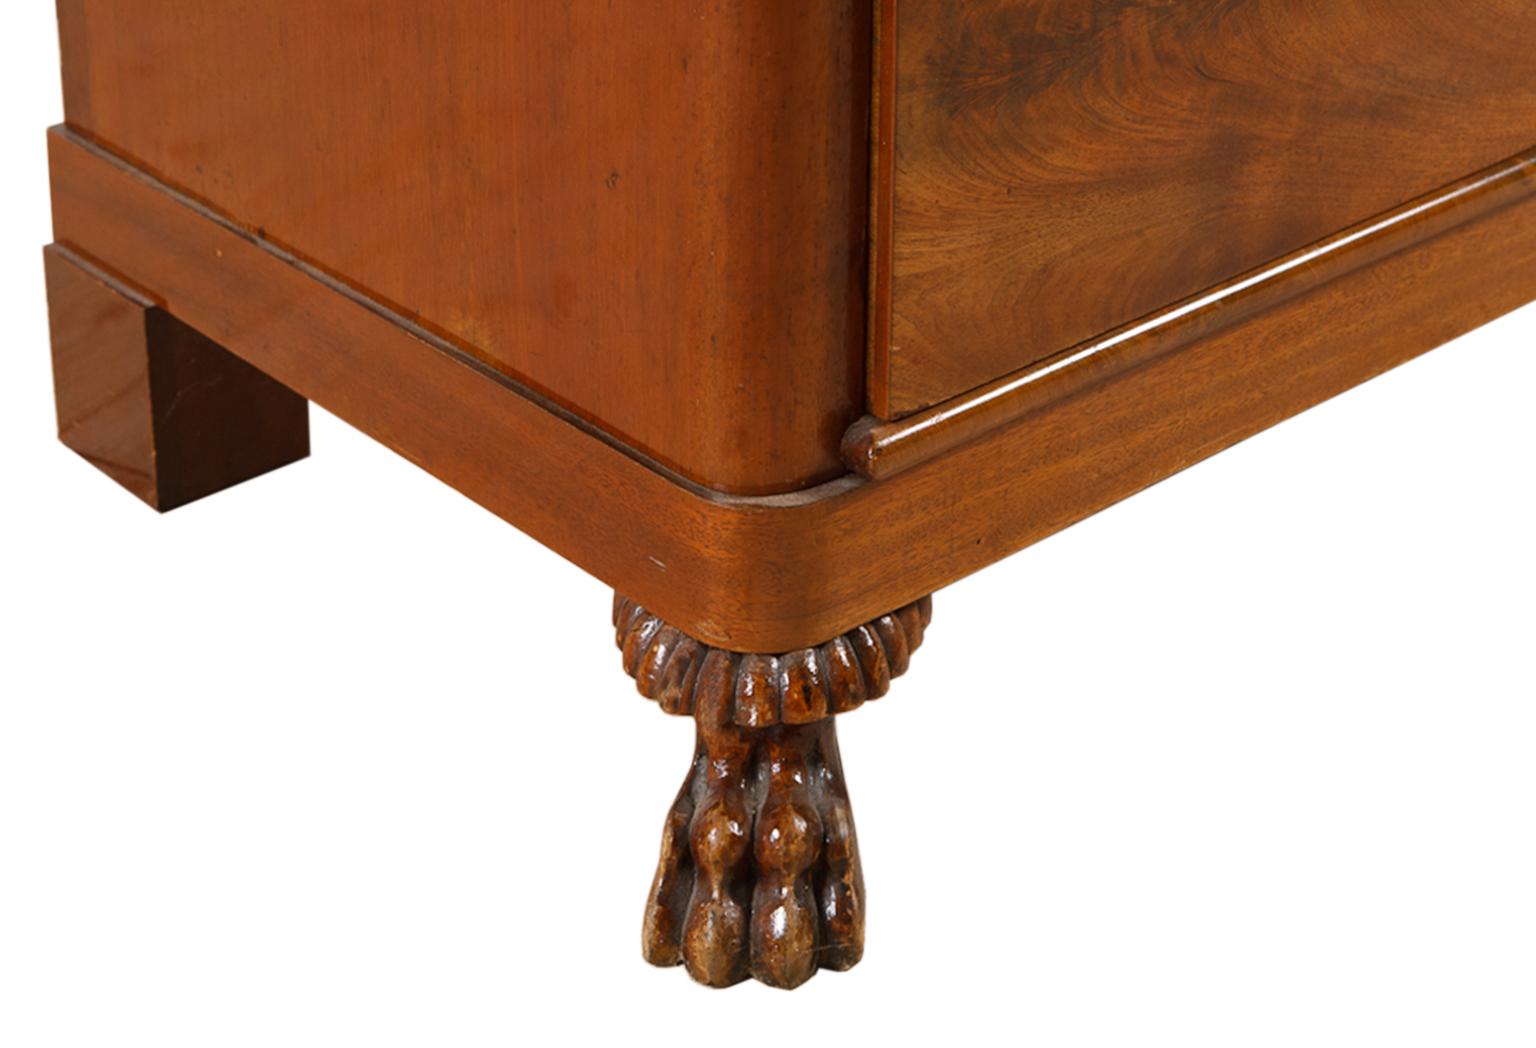 19th Century Empire Chest of Drawers in West Indies Mahogany, Denmark, circa 1820